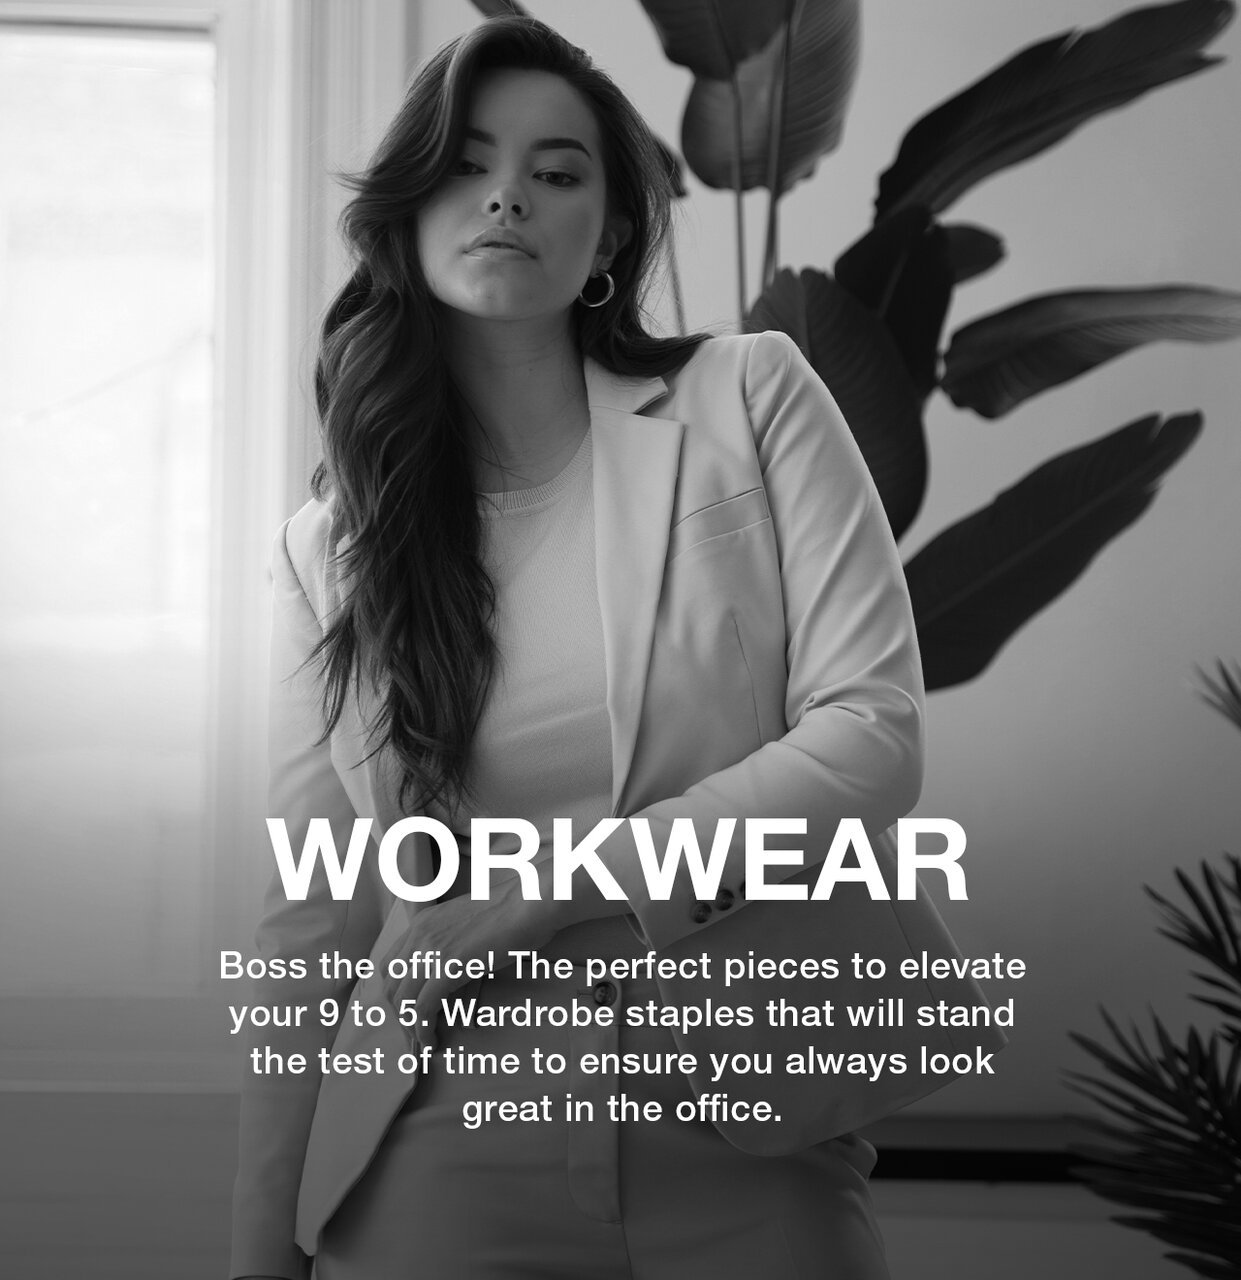 Workwear - Boss the office! The perfect pieces to elevate your 9 to 5. Wardrobe staples that will stand the test of time to ensure you always look great in the office.